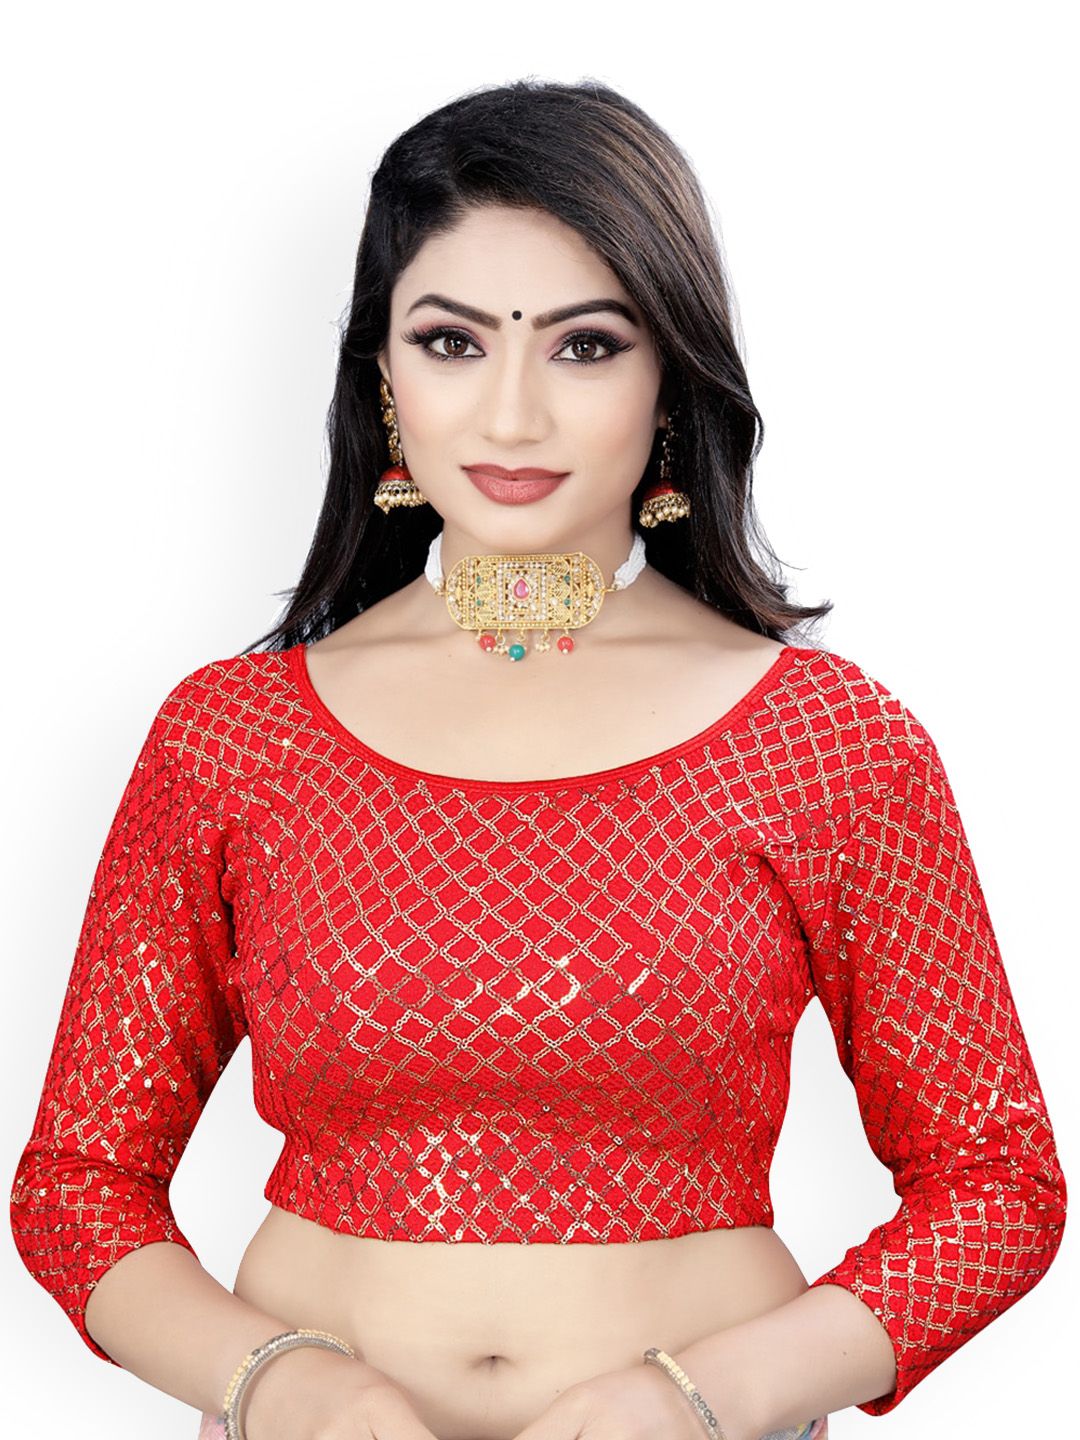 HIMRISE Embroidered Saree Blouse Price in India